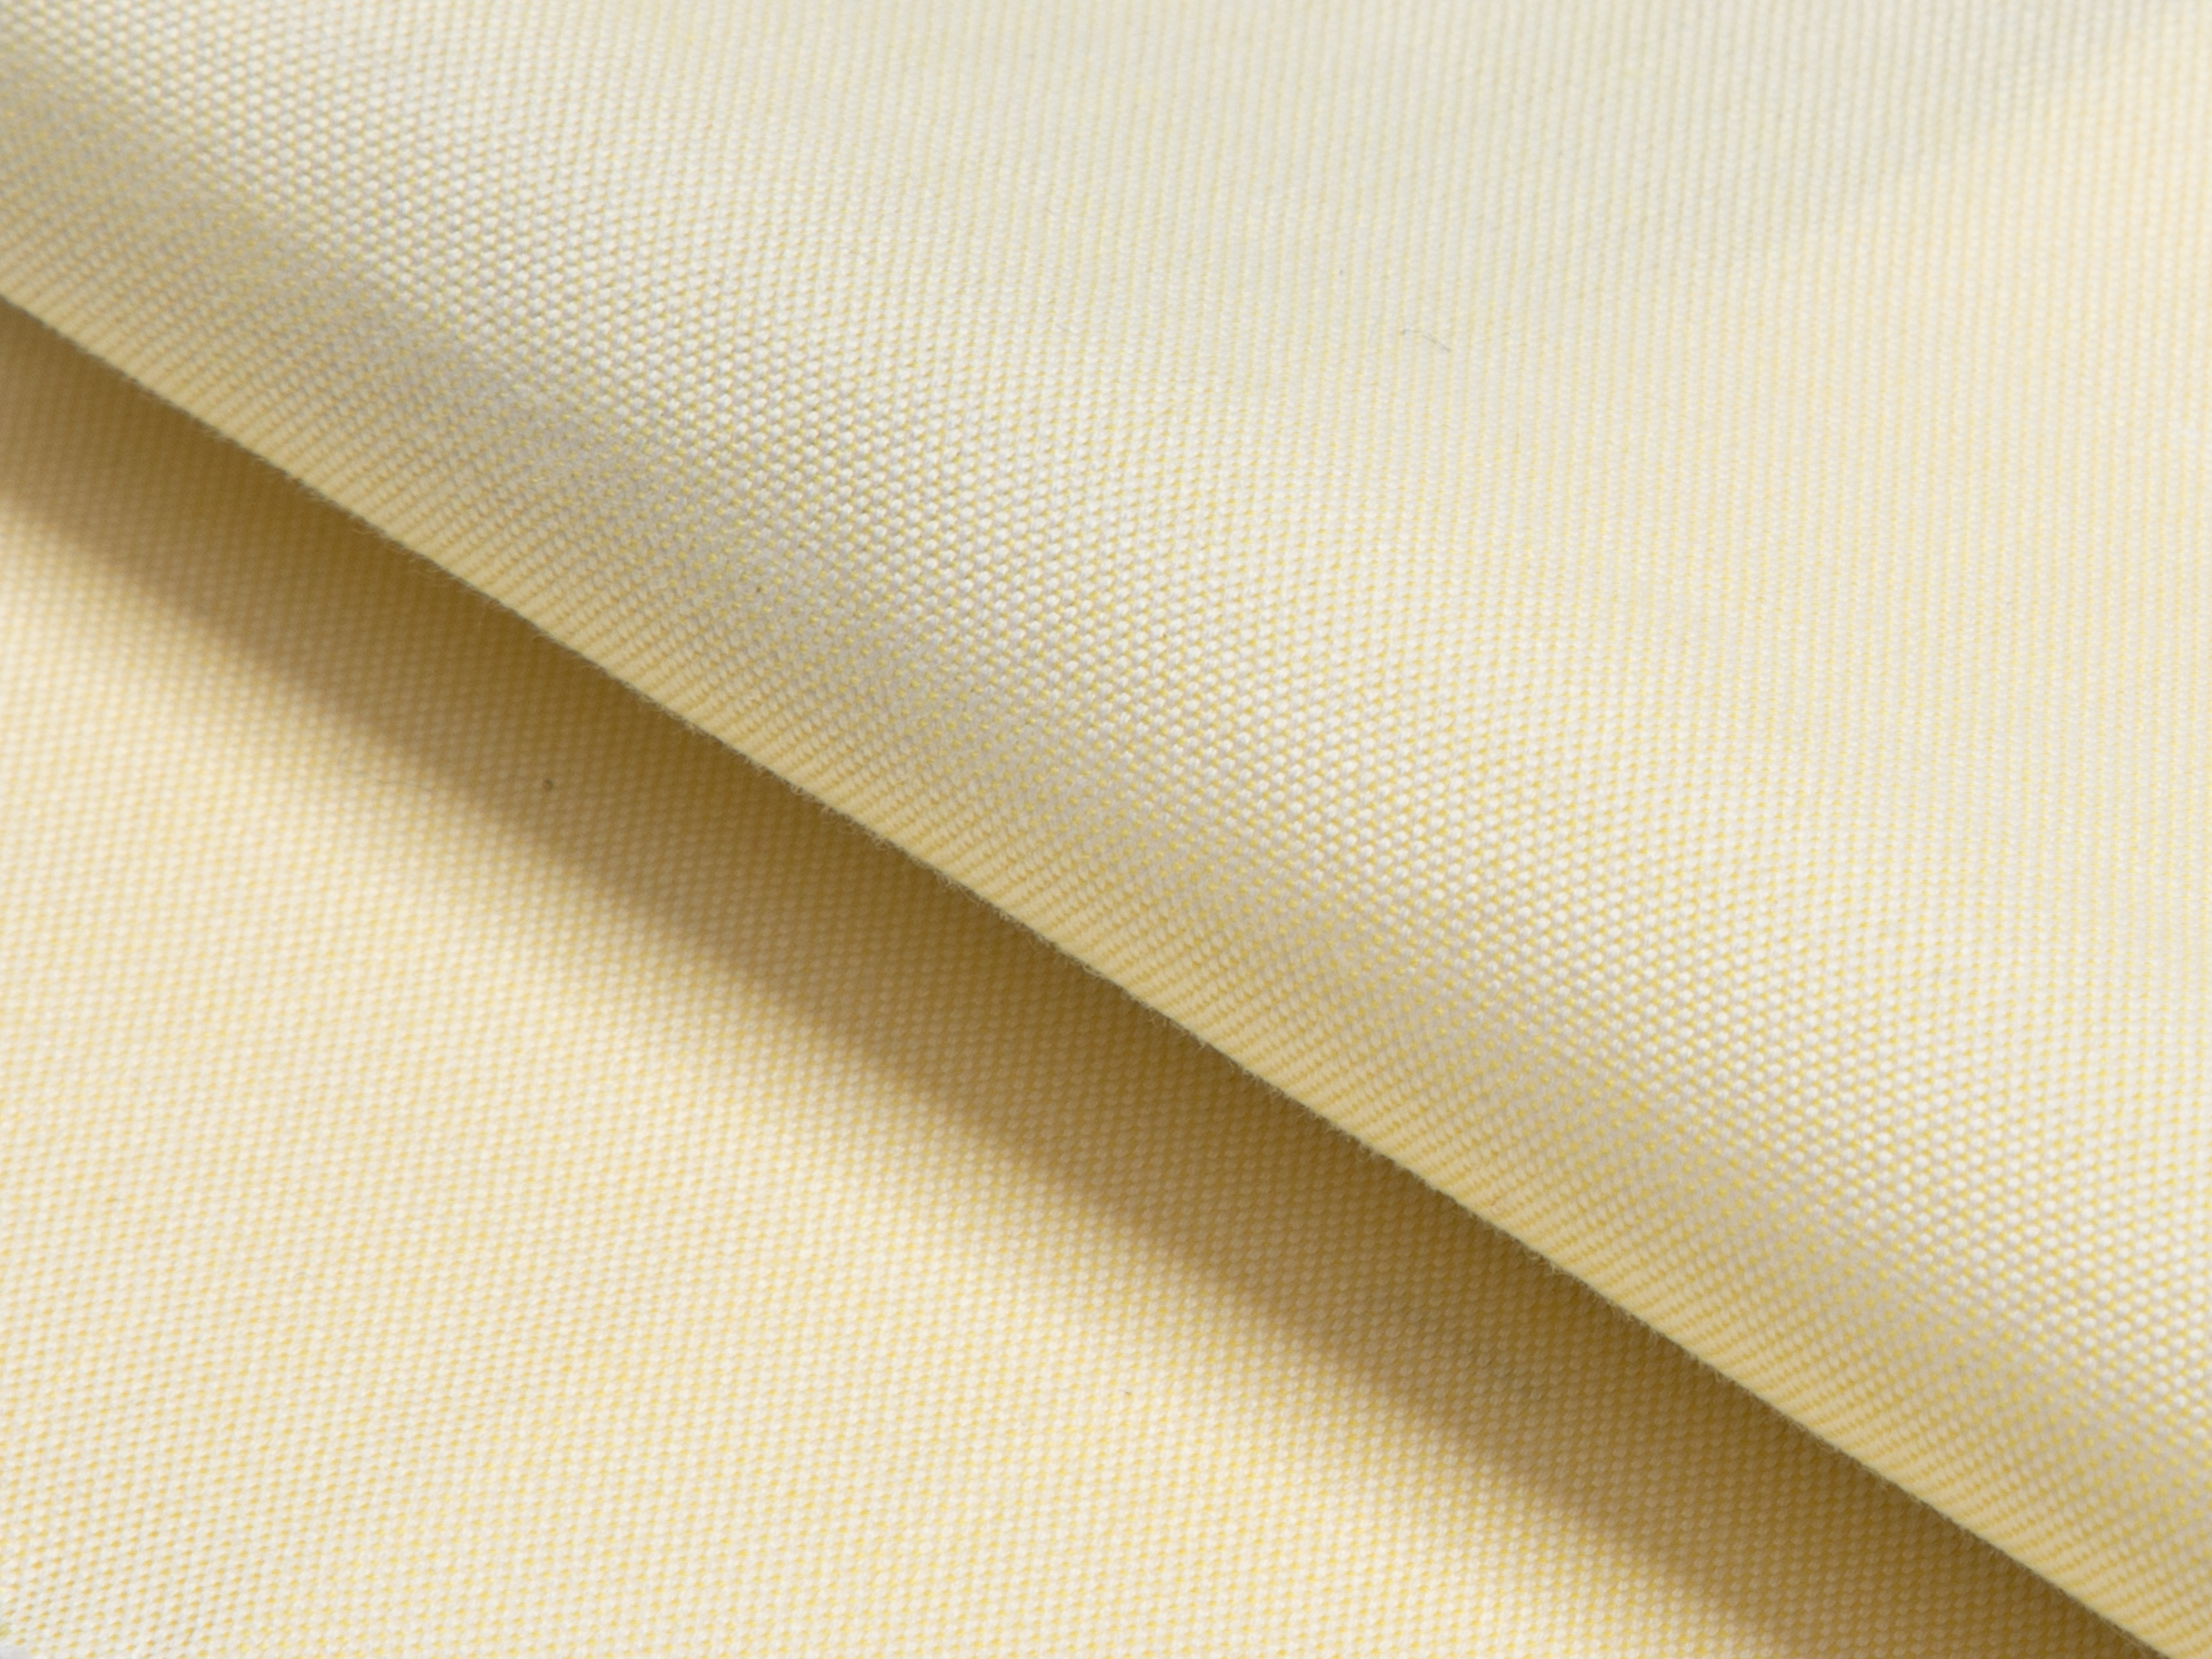 Buy tailor made shirts online - PINPOINT LUXURY - Pinpoint Yellow